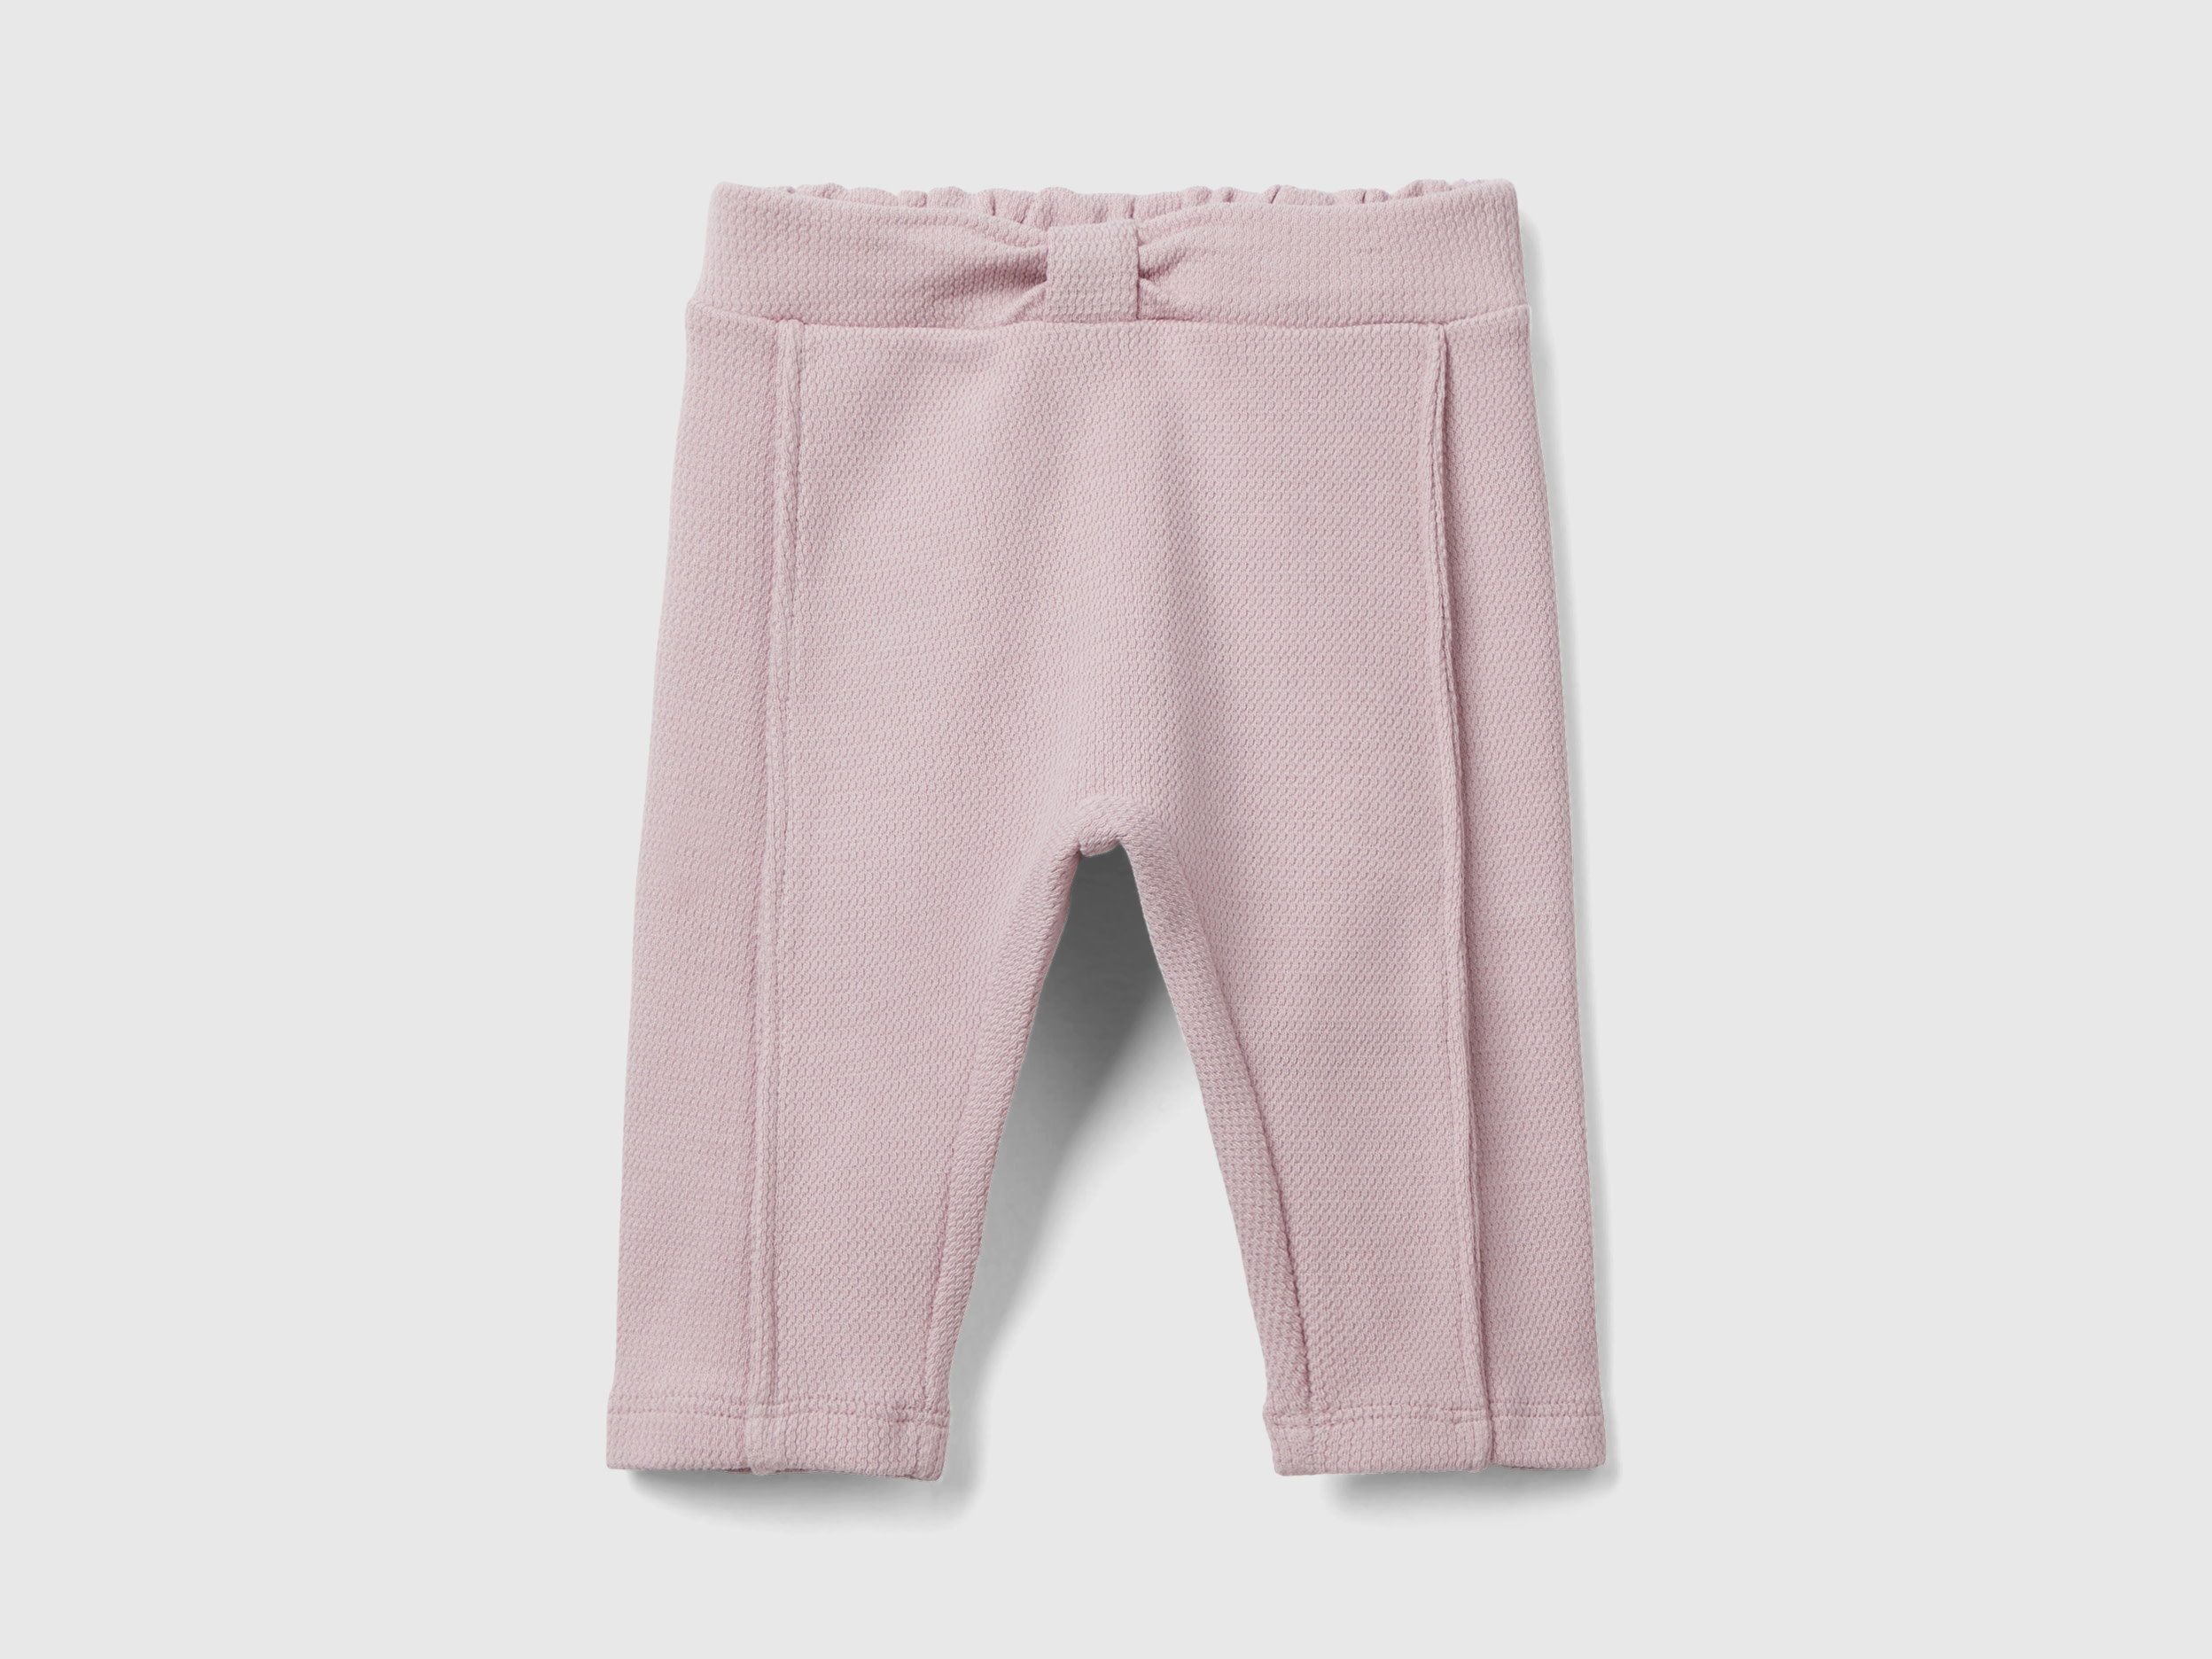 Benetton, Trousers With Knotted Waist, size 3-6, Pink, Kids